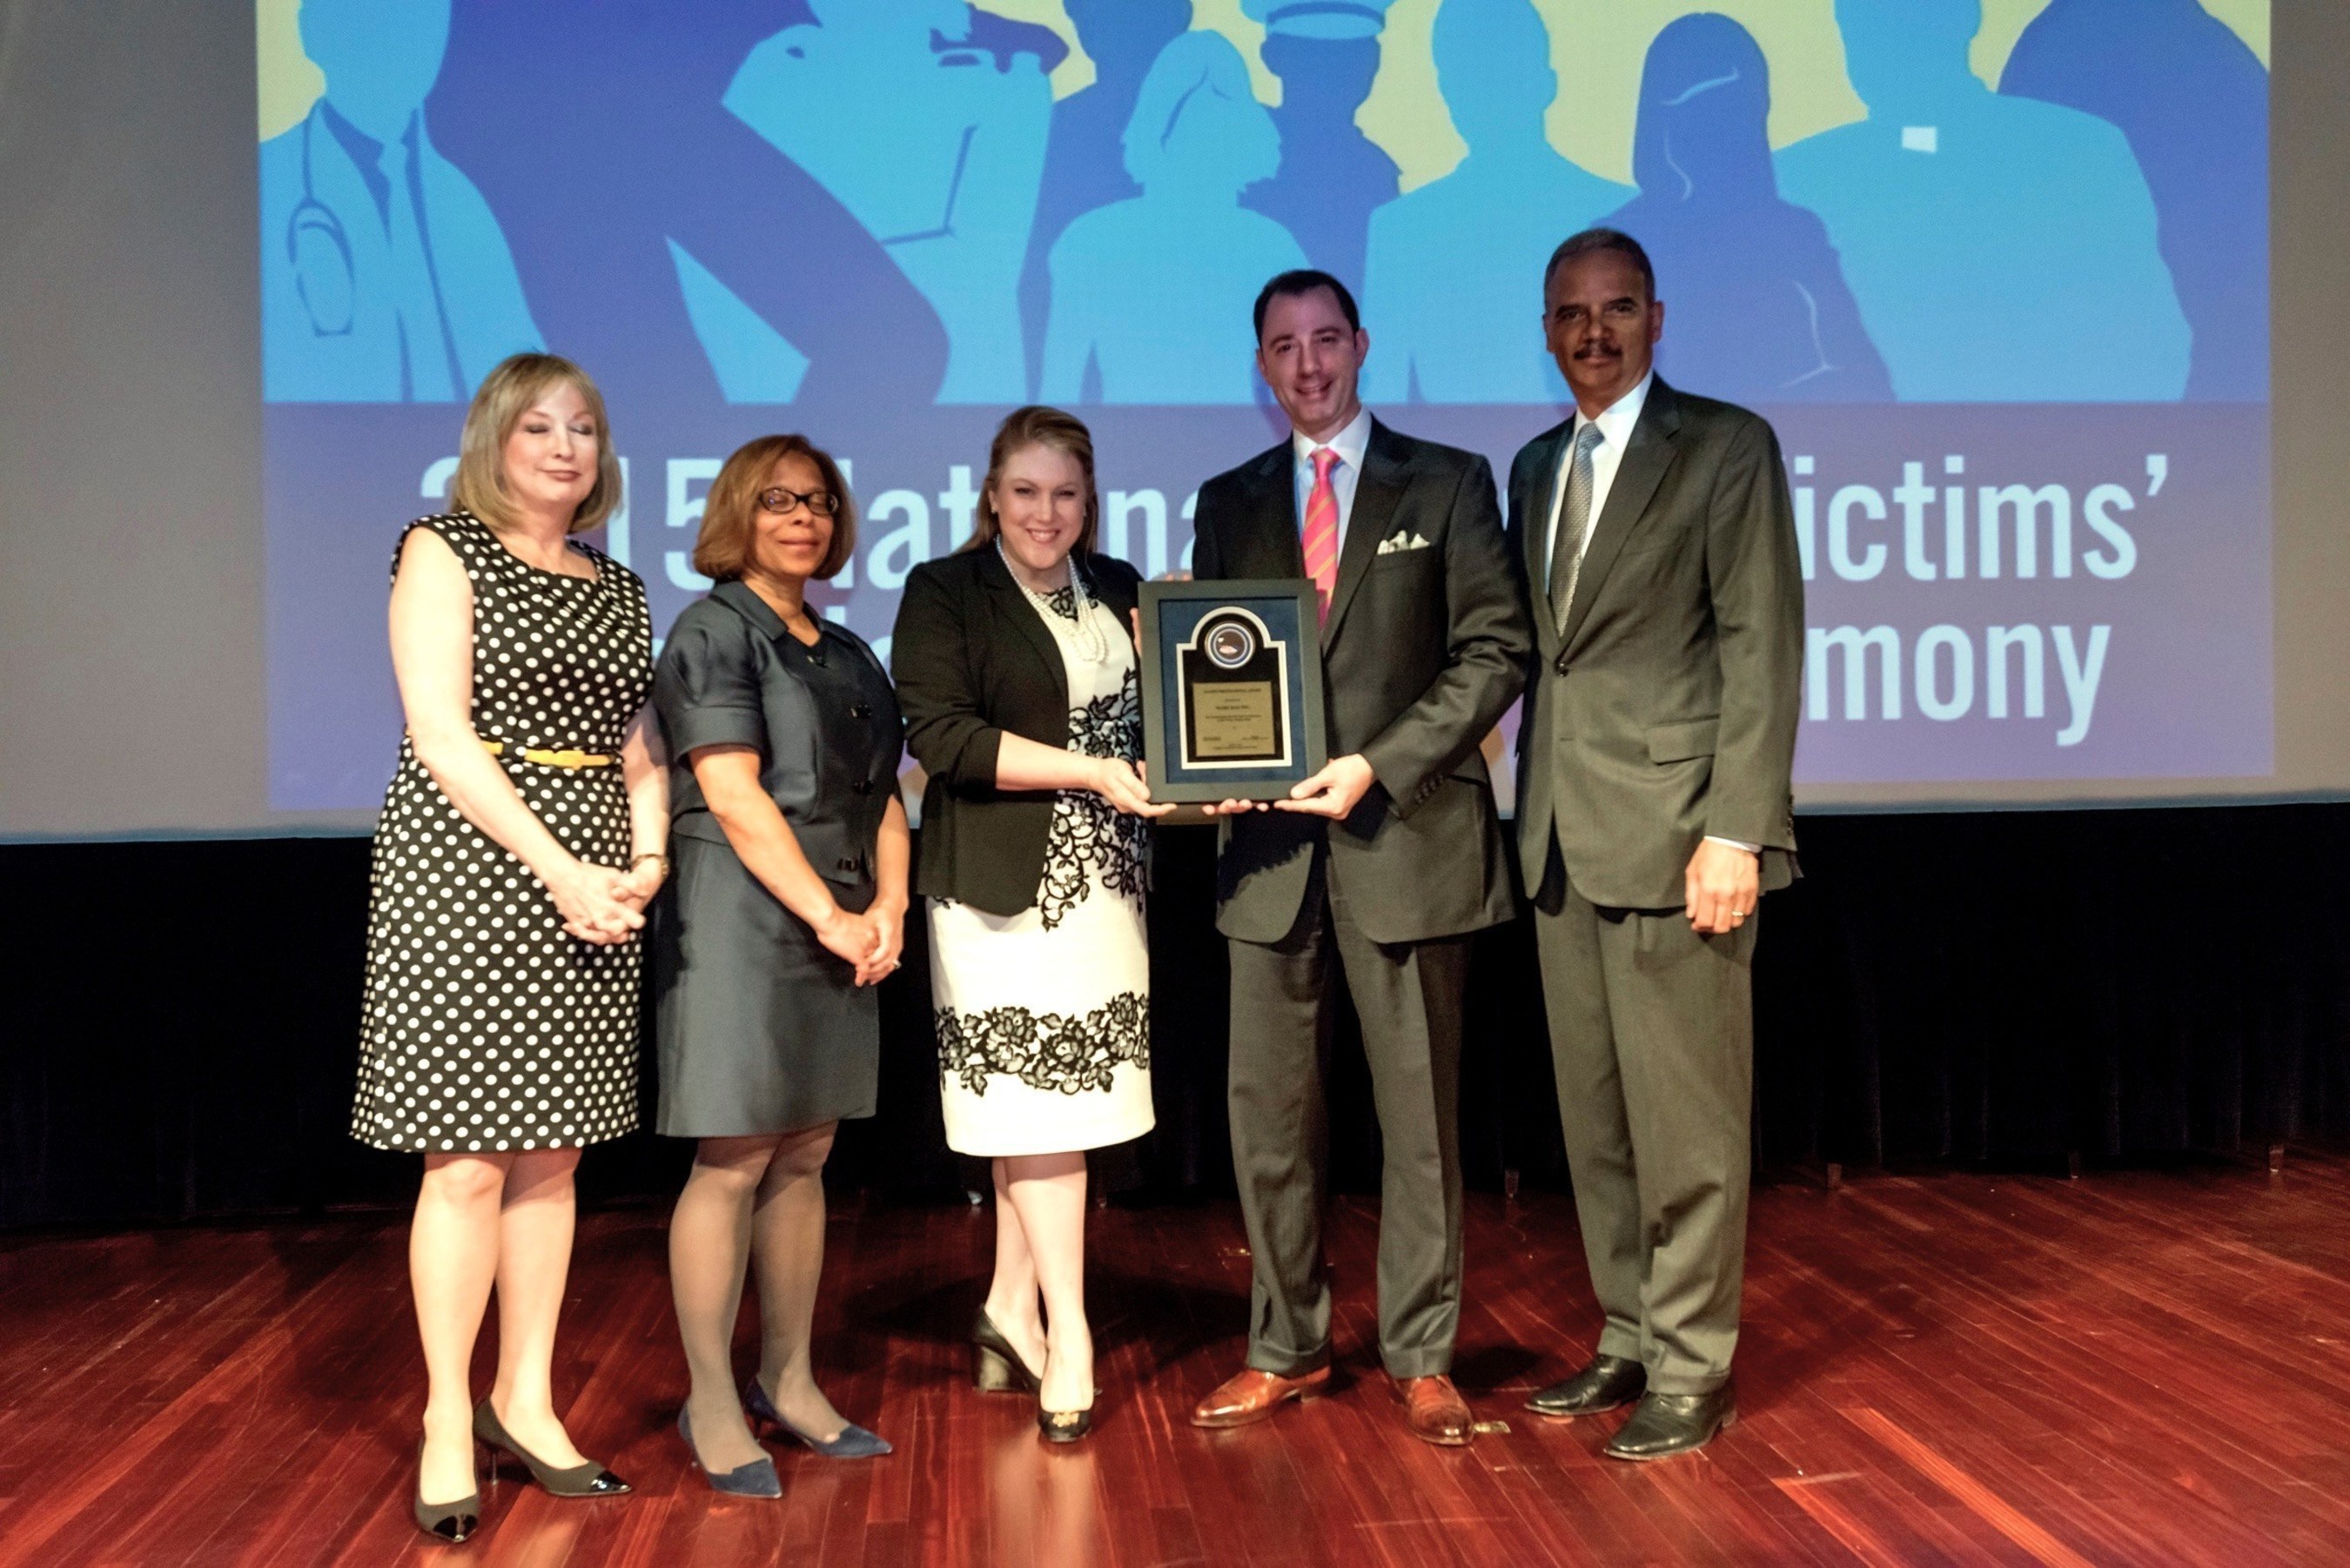 Mary Kay Inc. receives the Allied Professional Award from the U.S. Department of Justice for the company's long-term commitment to preventing and ending domestic violence at the National Crime Victims' Rights Service Awards held April 21, 2015 in Washington, D.C.